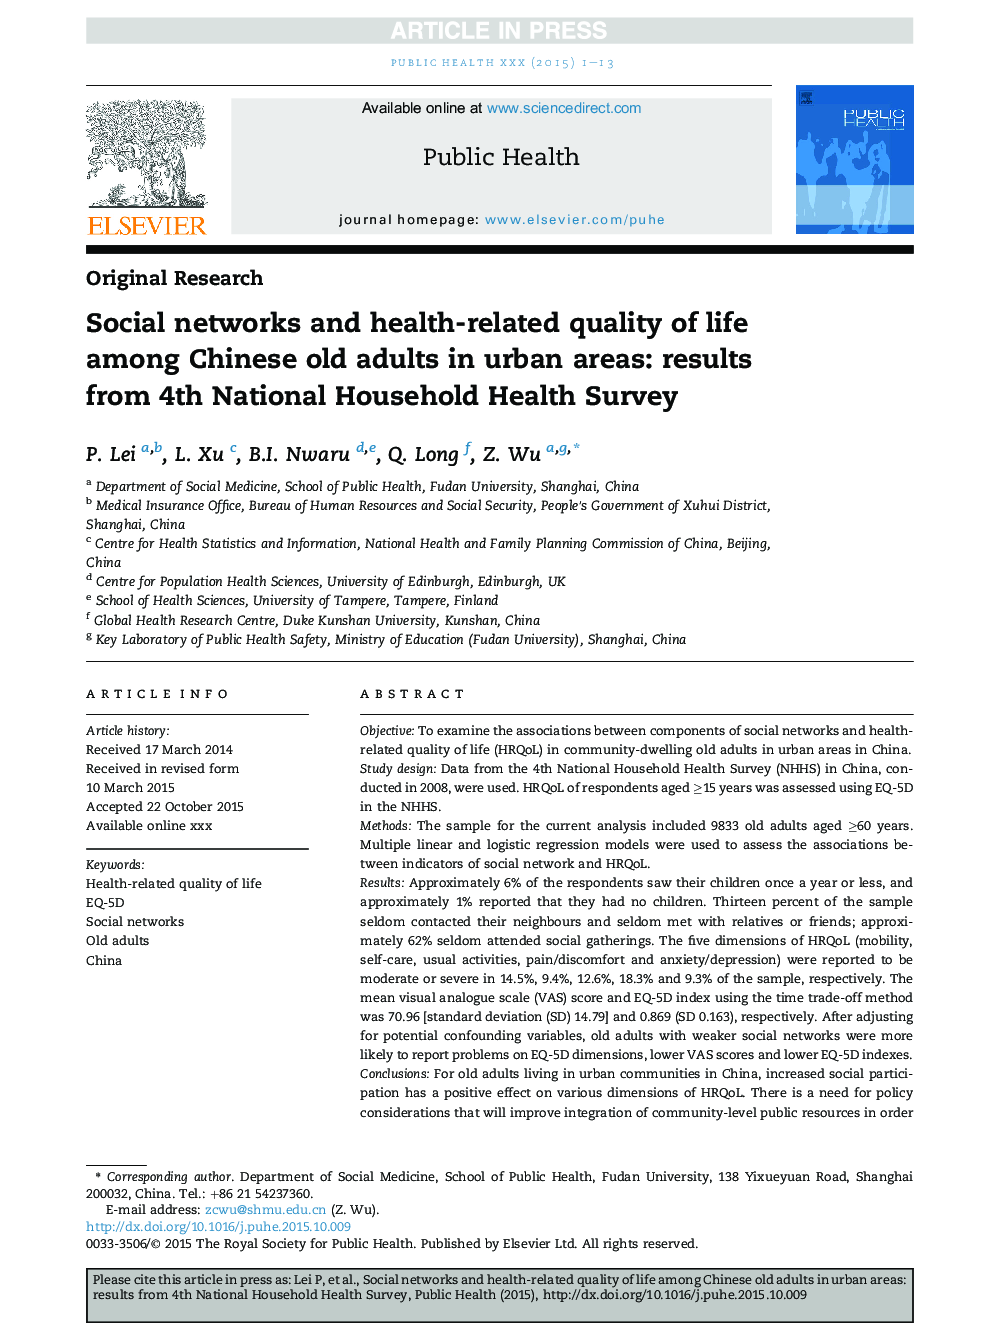 Social networks and health-related quality of life among Chinese old adults in urban areas: results from 4th National Household Health Survey